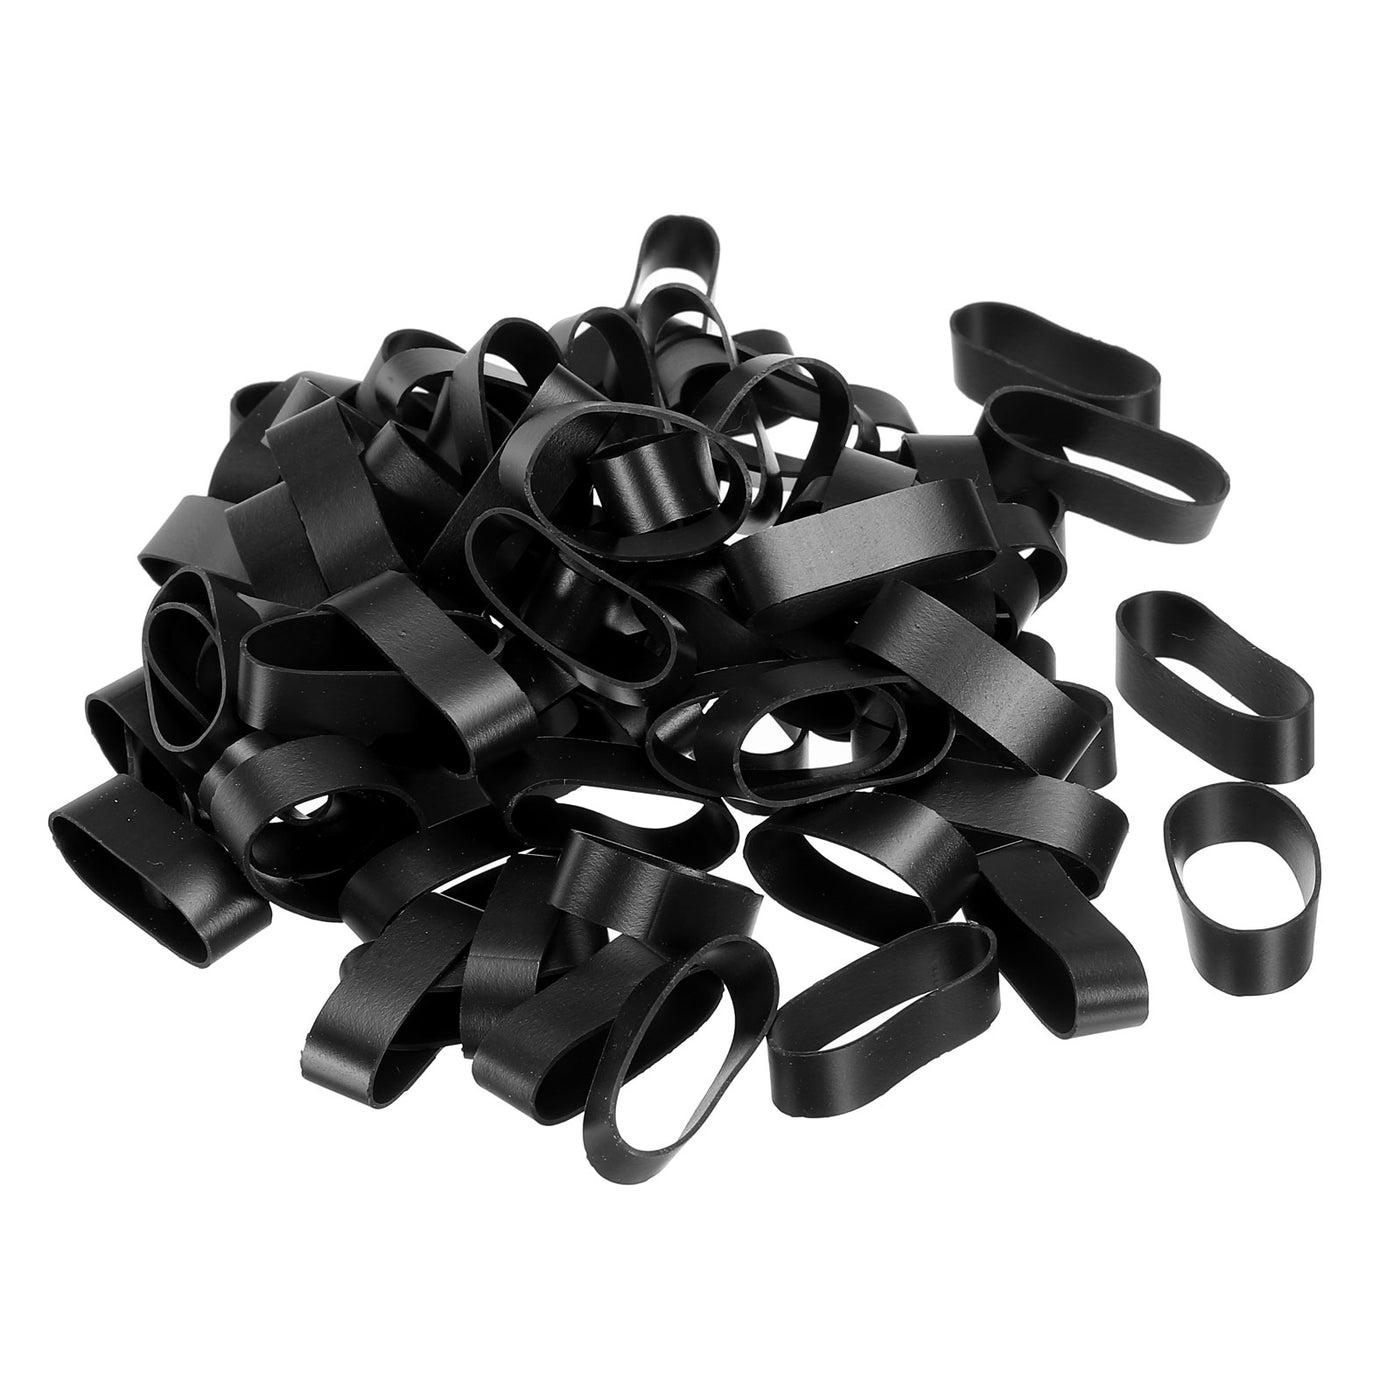 Harfington Silicone Rubber Bands Rings 50pcs Non-slip 0.9" Flat Black for Books, Art, Boxes, Cord Wrapping, Bag Wraps